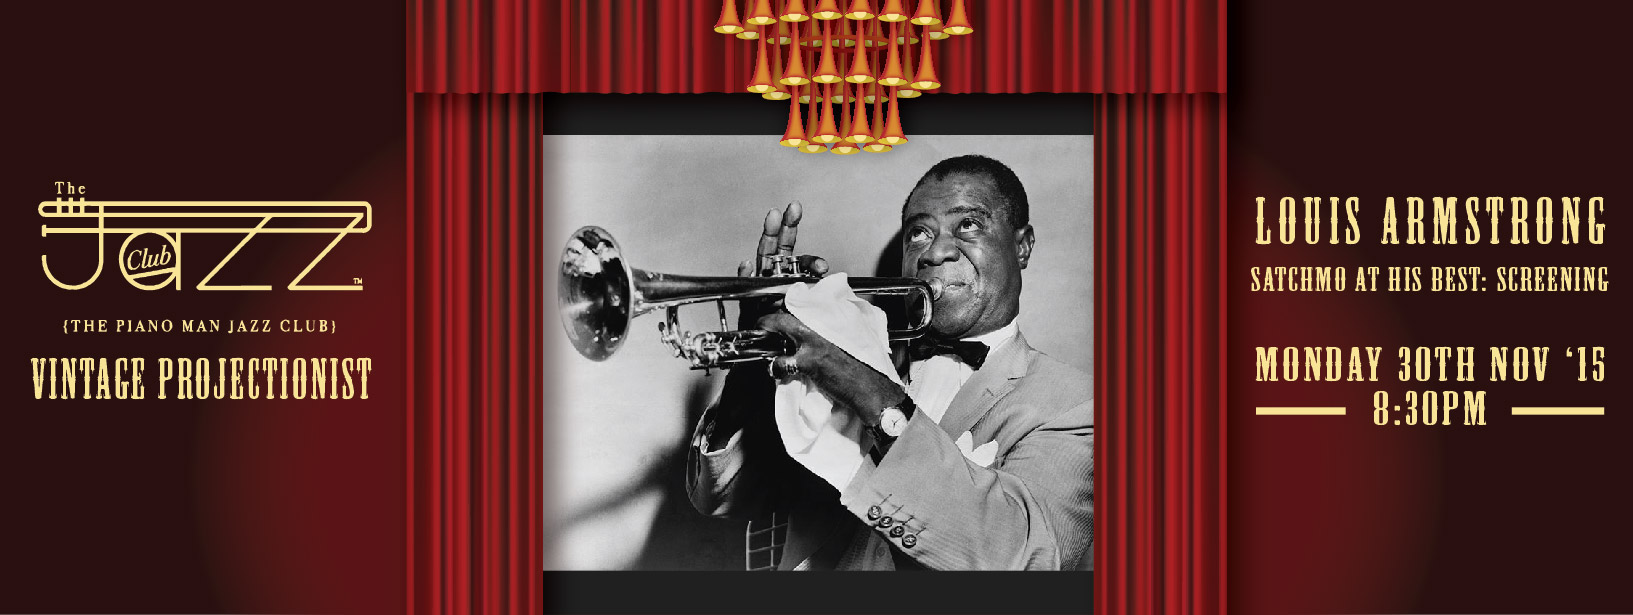 Louis Armstrong, nicknamed Satchmo, trumpeter, musician, and jazz